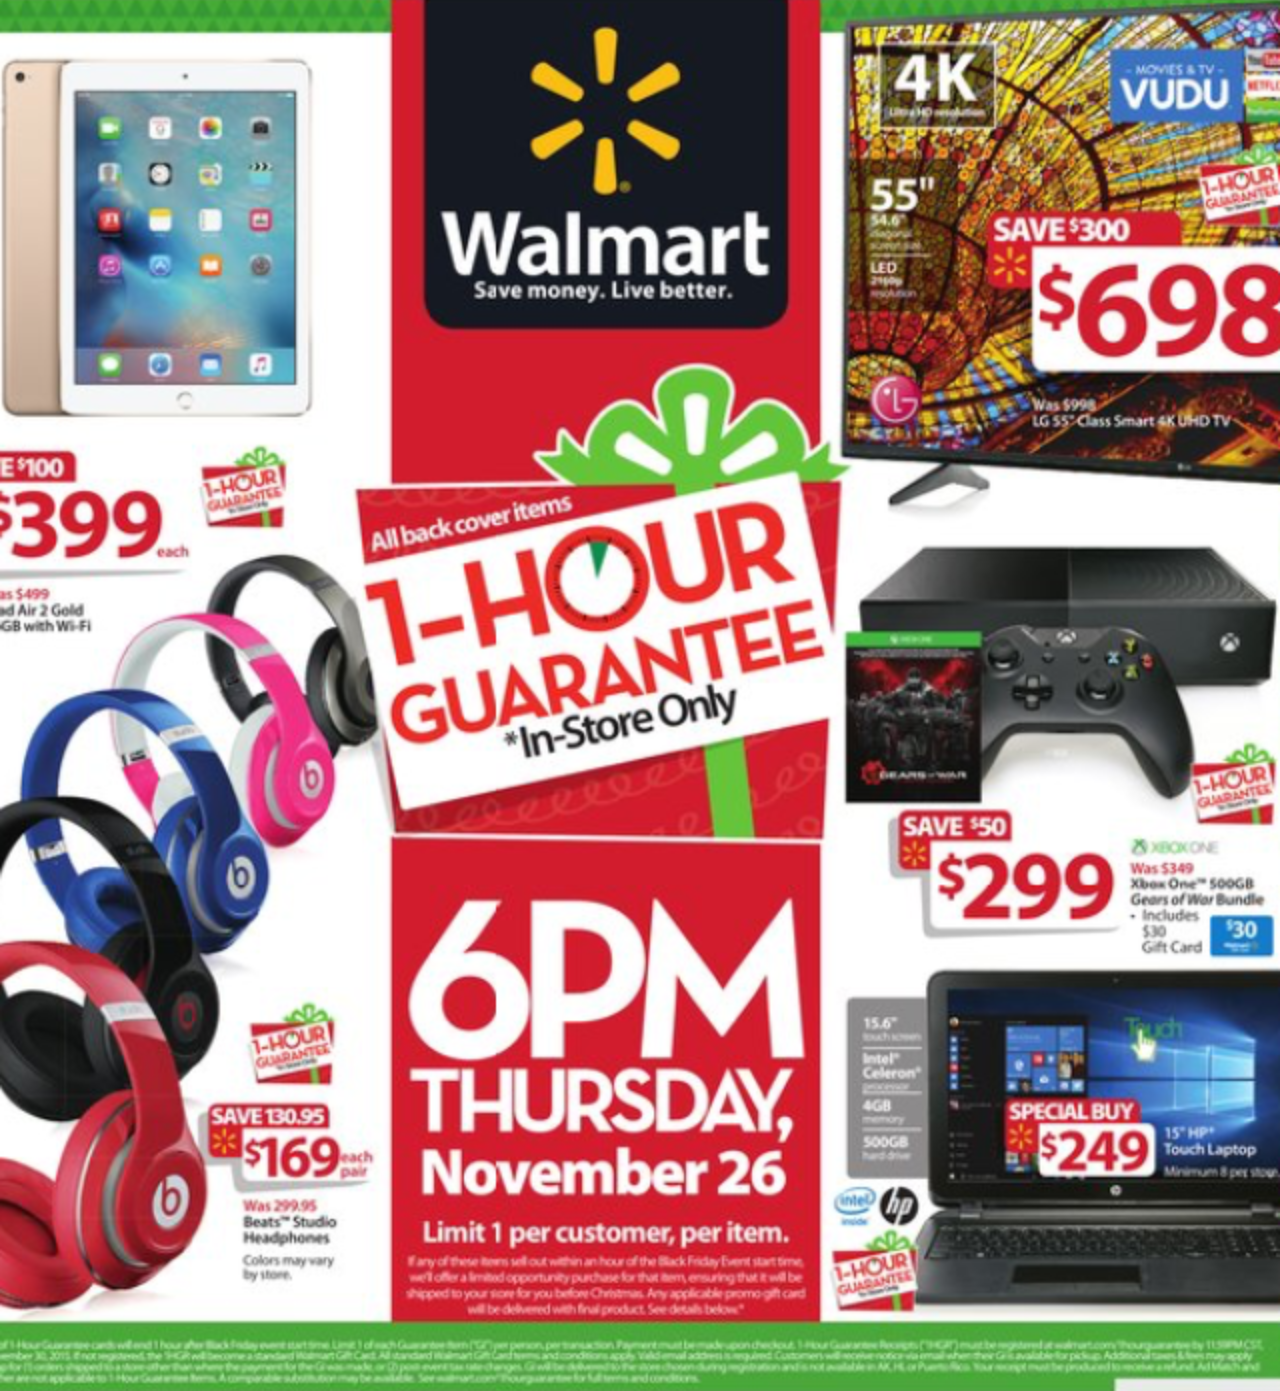 Walmart&#39;s Black Friday ad leak hits with Xbox One/PS4 $299, 4K UHDTV deals, iPad Air 2 $100 off ...